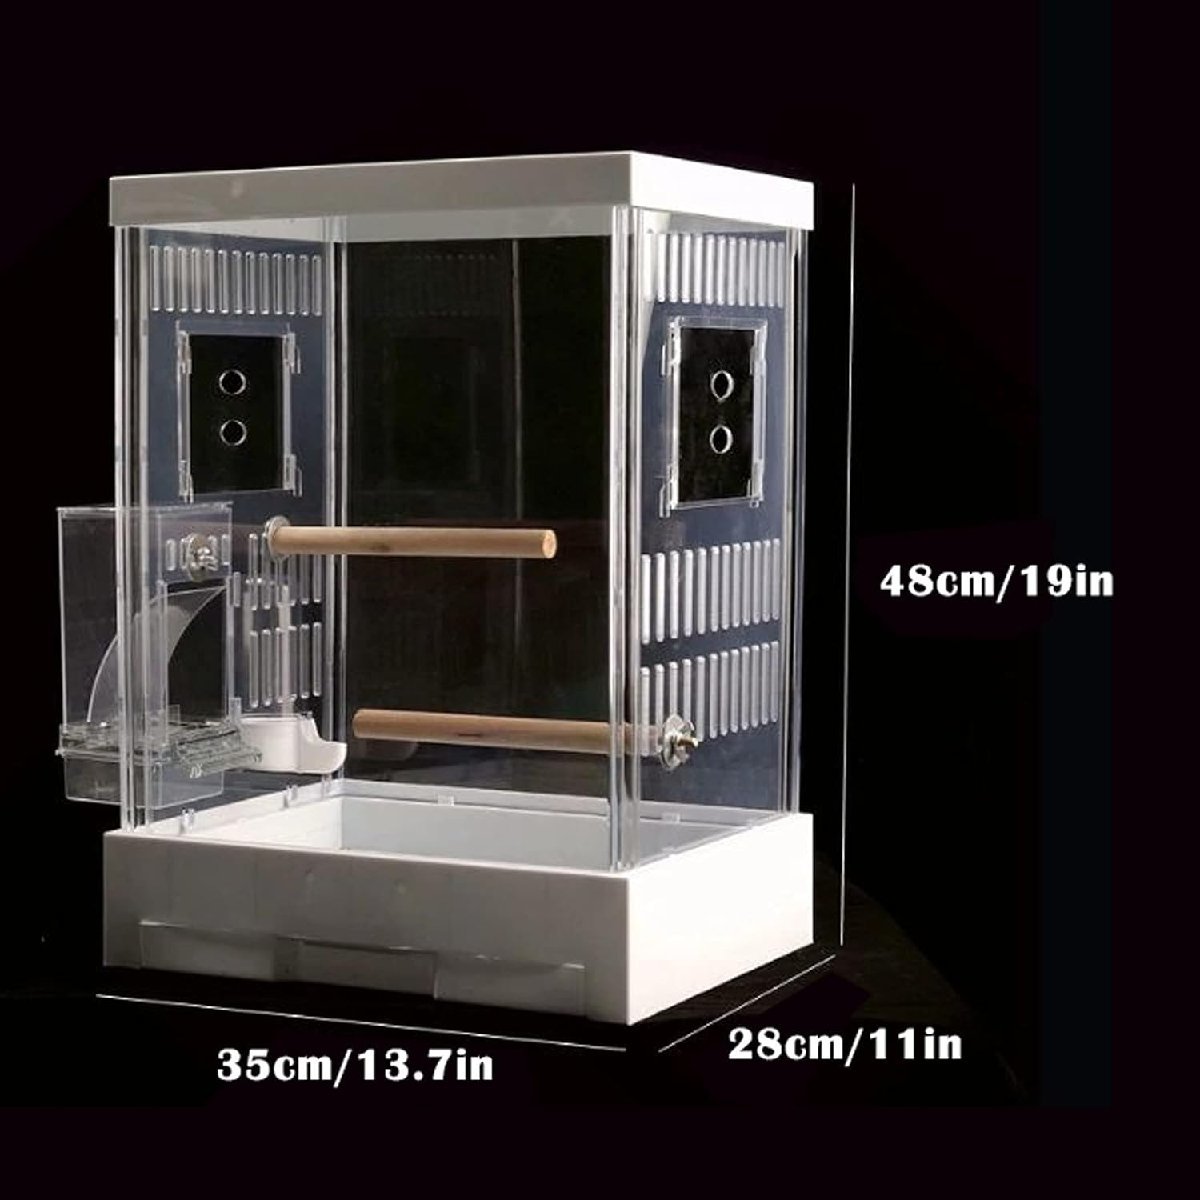  bird cage indoor outdoors. small bird therefore. automatic feeder . attached white bird. carrier. transparent . plastic. bird. travel cage flight bird cage 